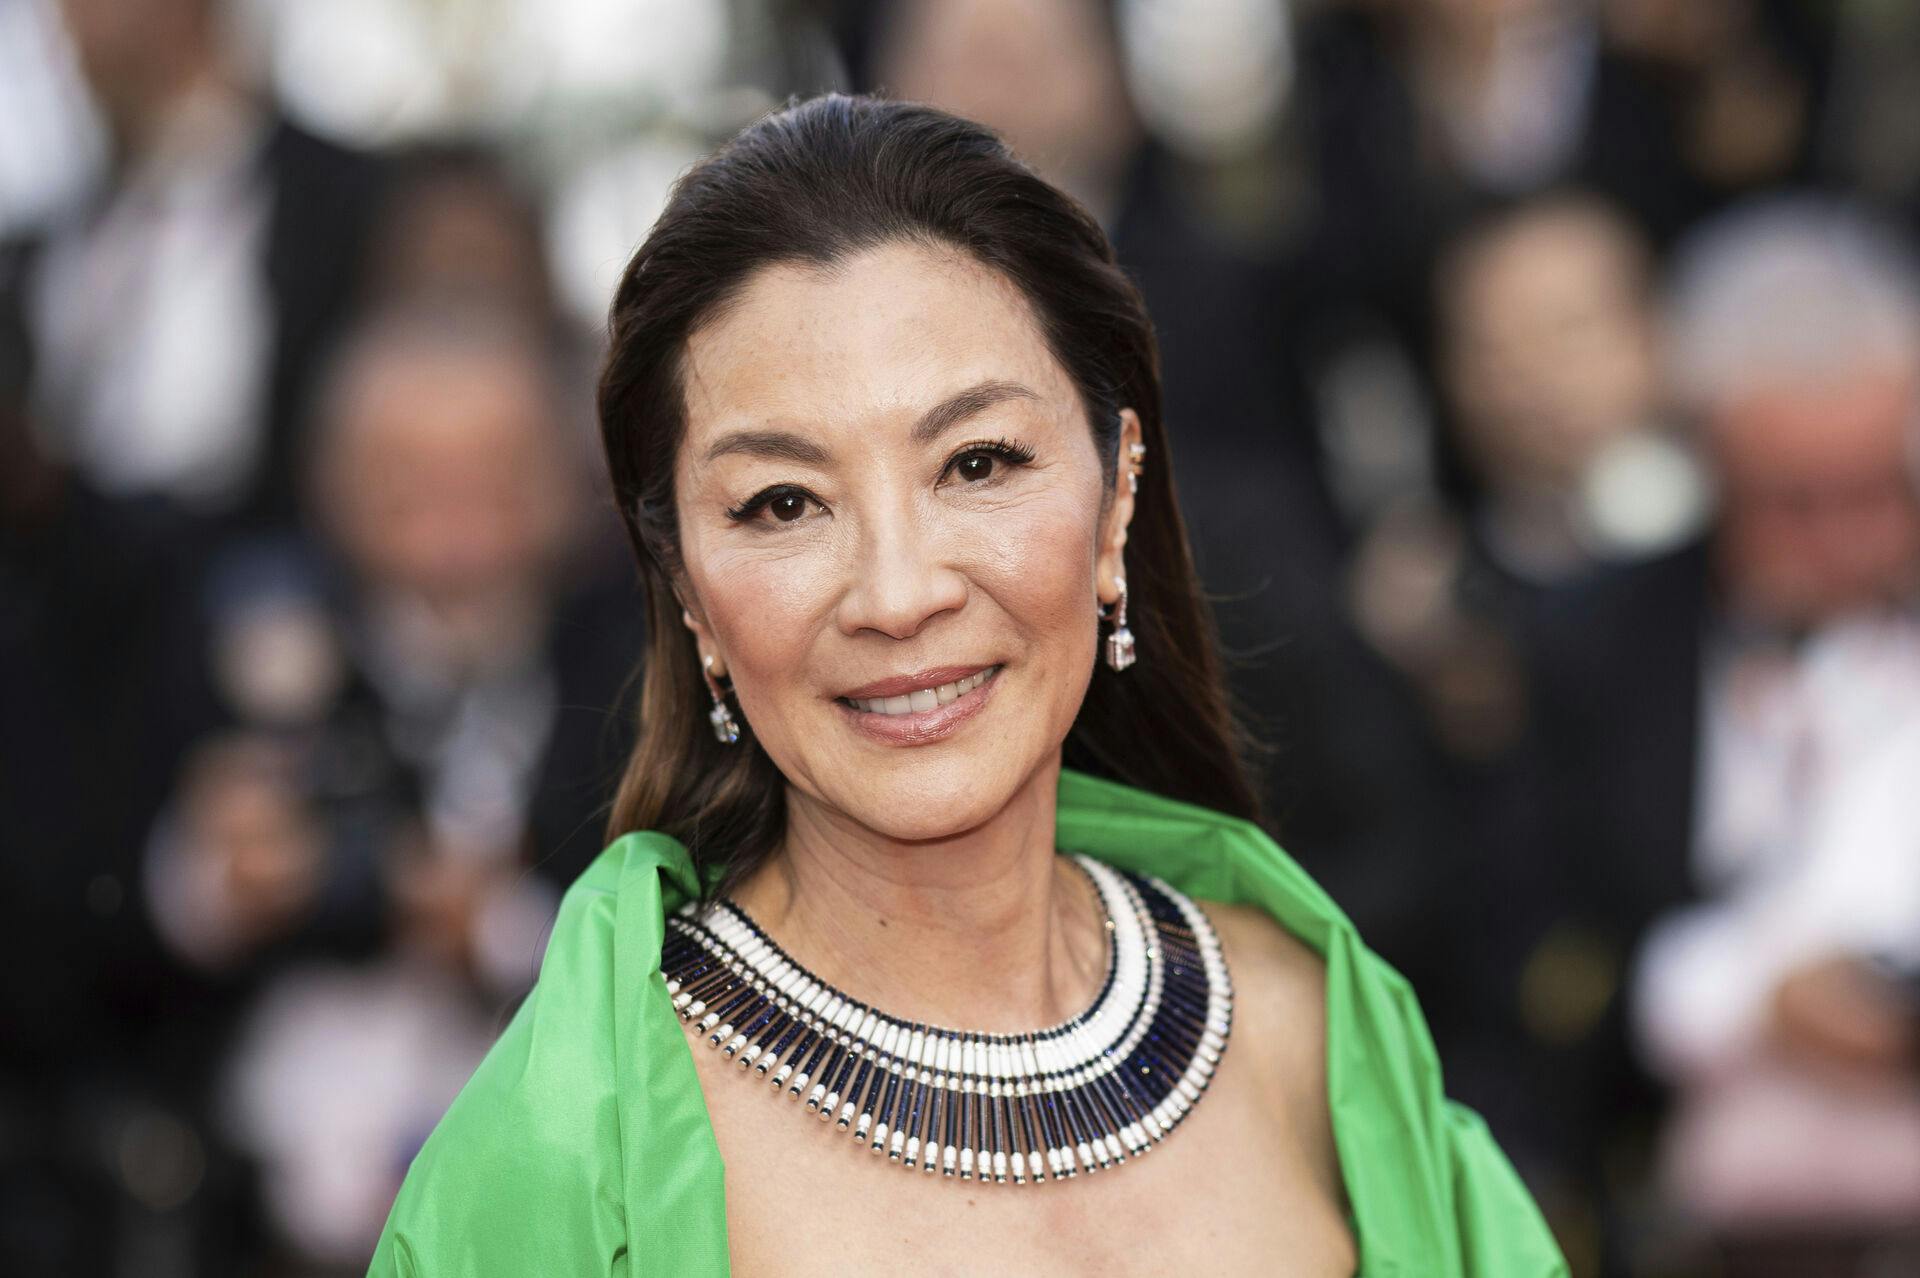 Michelle Yeoh poses for photographers upon arrival at the premiere of the film 'Firebrand' at the 76th international film festival, Cannes, southern France, Sunday, May 21, 2023. (Photo by Vianney Le Caer/Invision/AP)